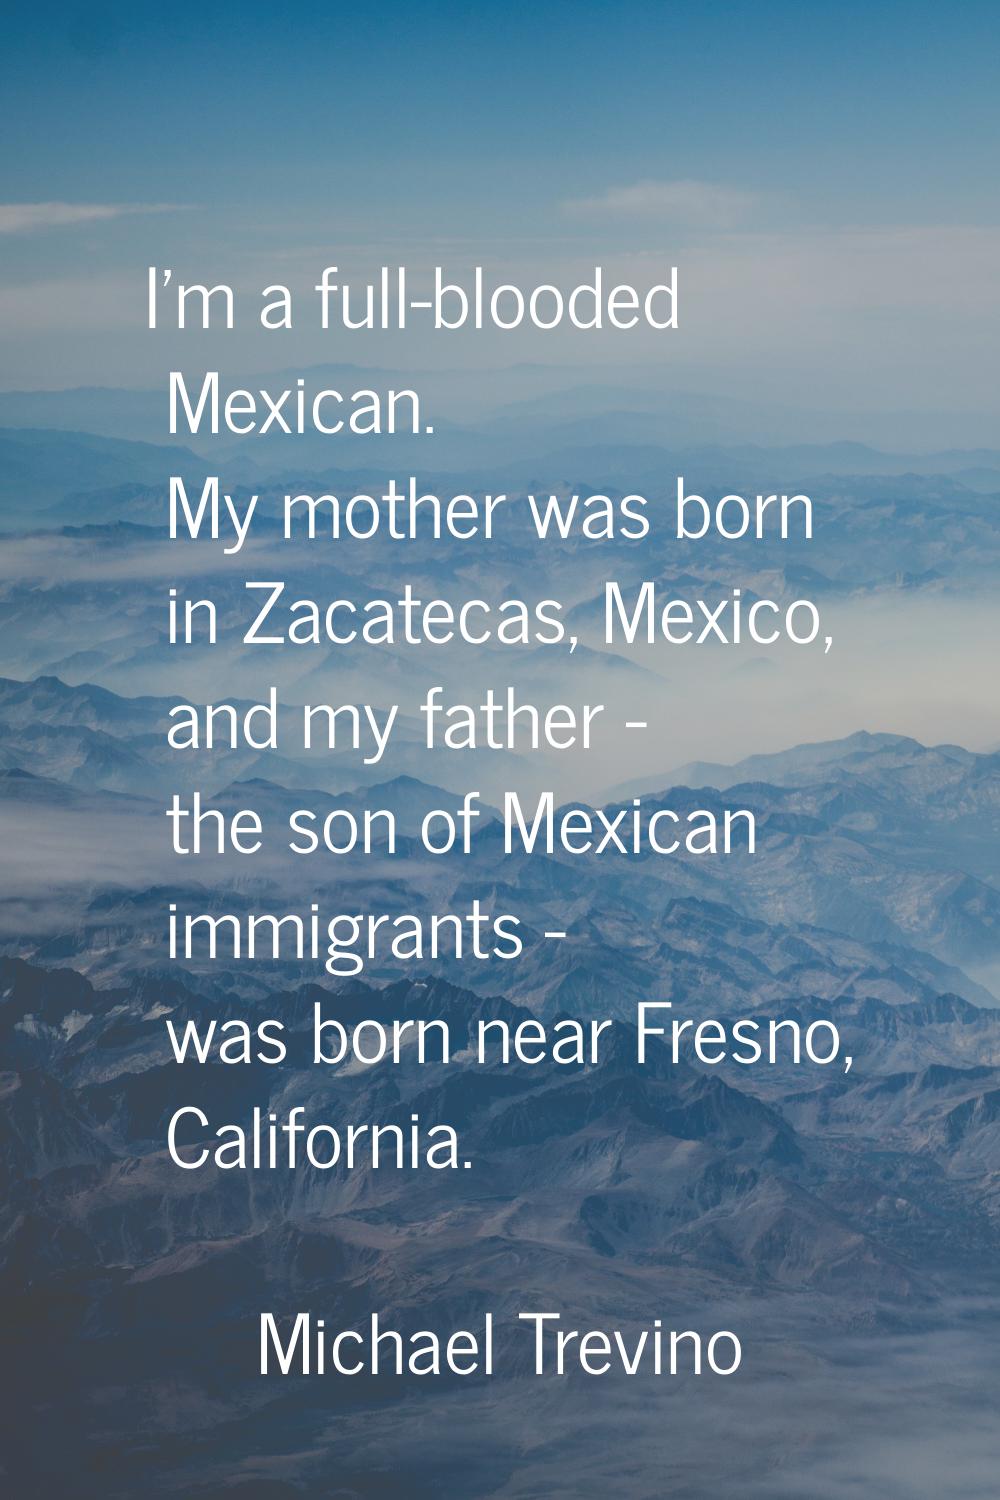 I'm a full-blooded Mexican. My mother was born in Zacatecas, Mexico, and my father - the son of Mex